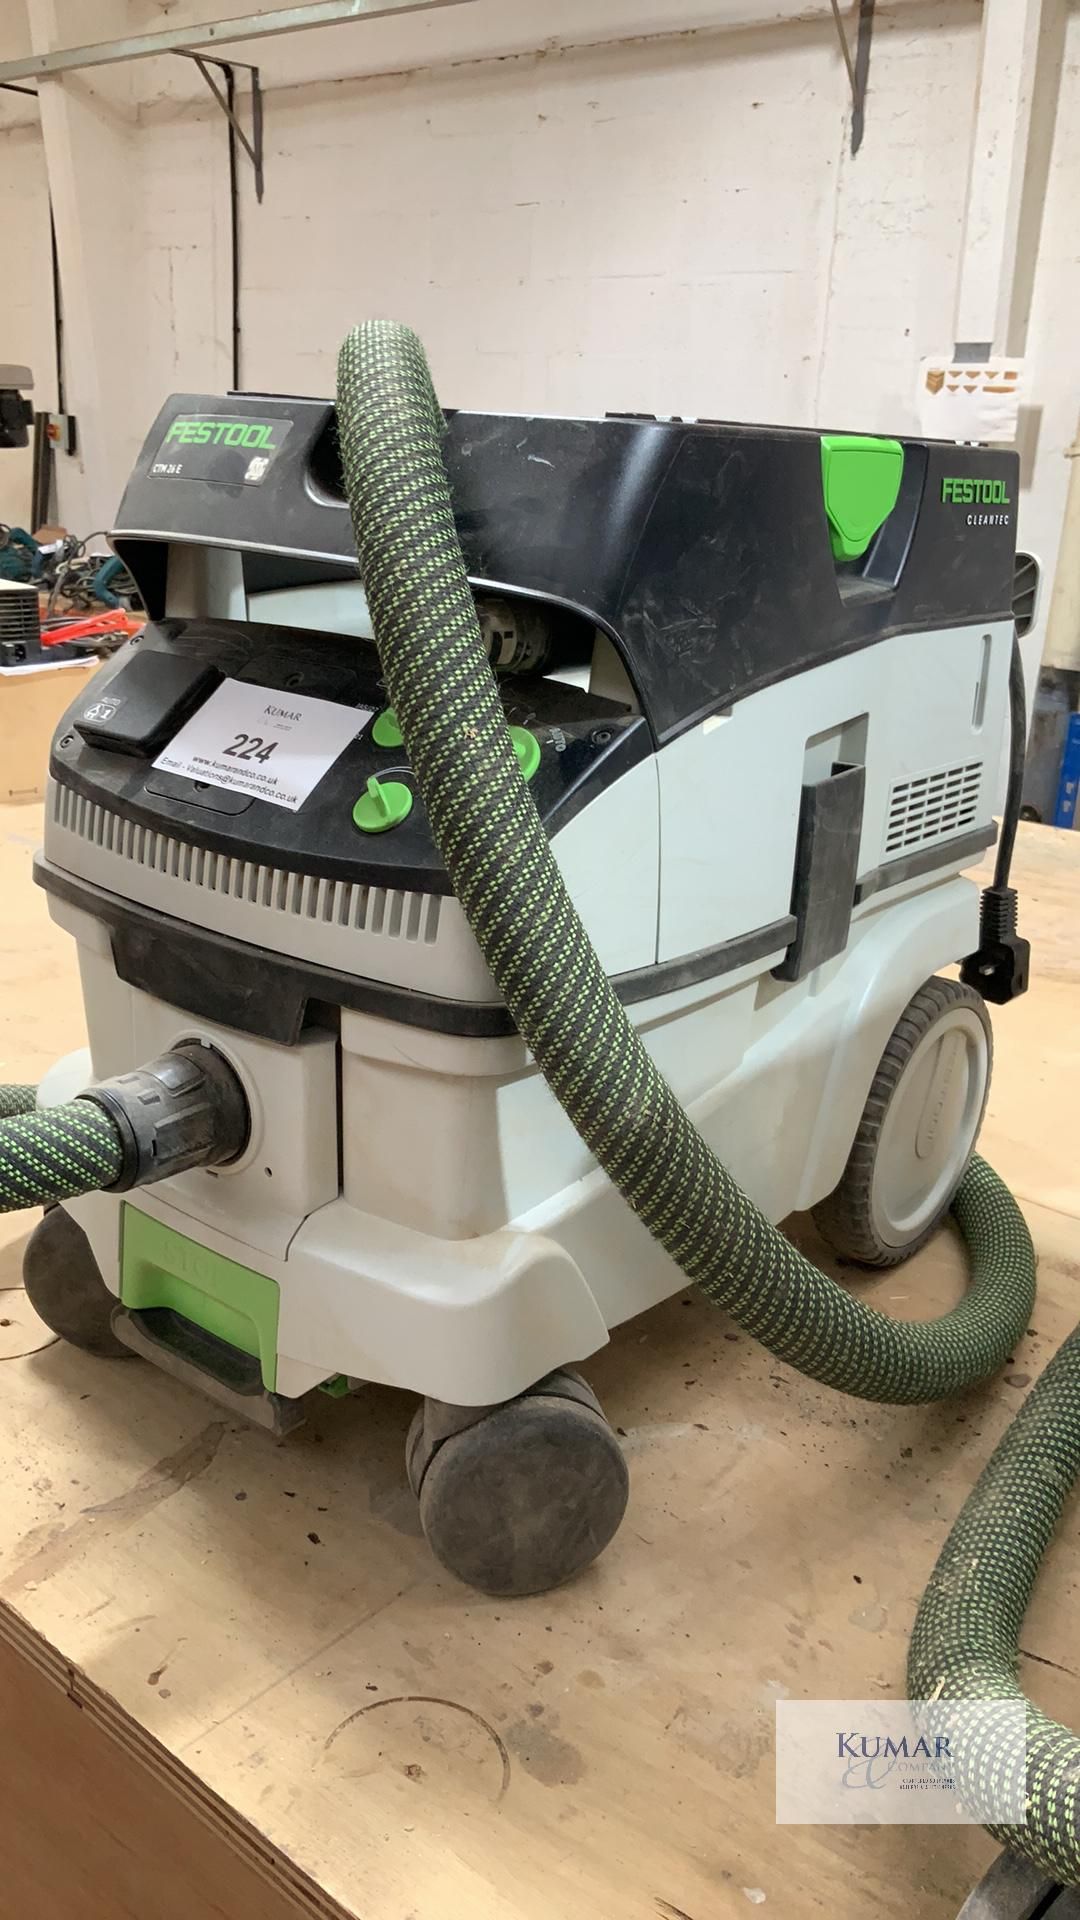 Festoon Cleantec CTM 26 E Mobile Dust Extraction unit 240v - Believed to be 2019 - Image 4 of 4